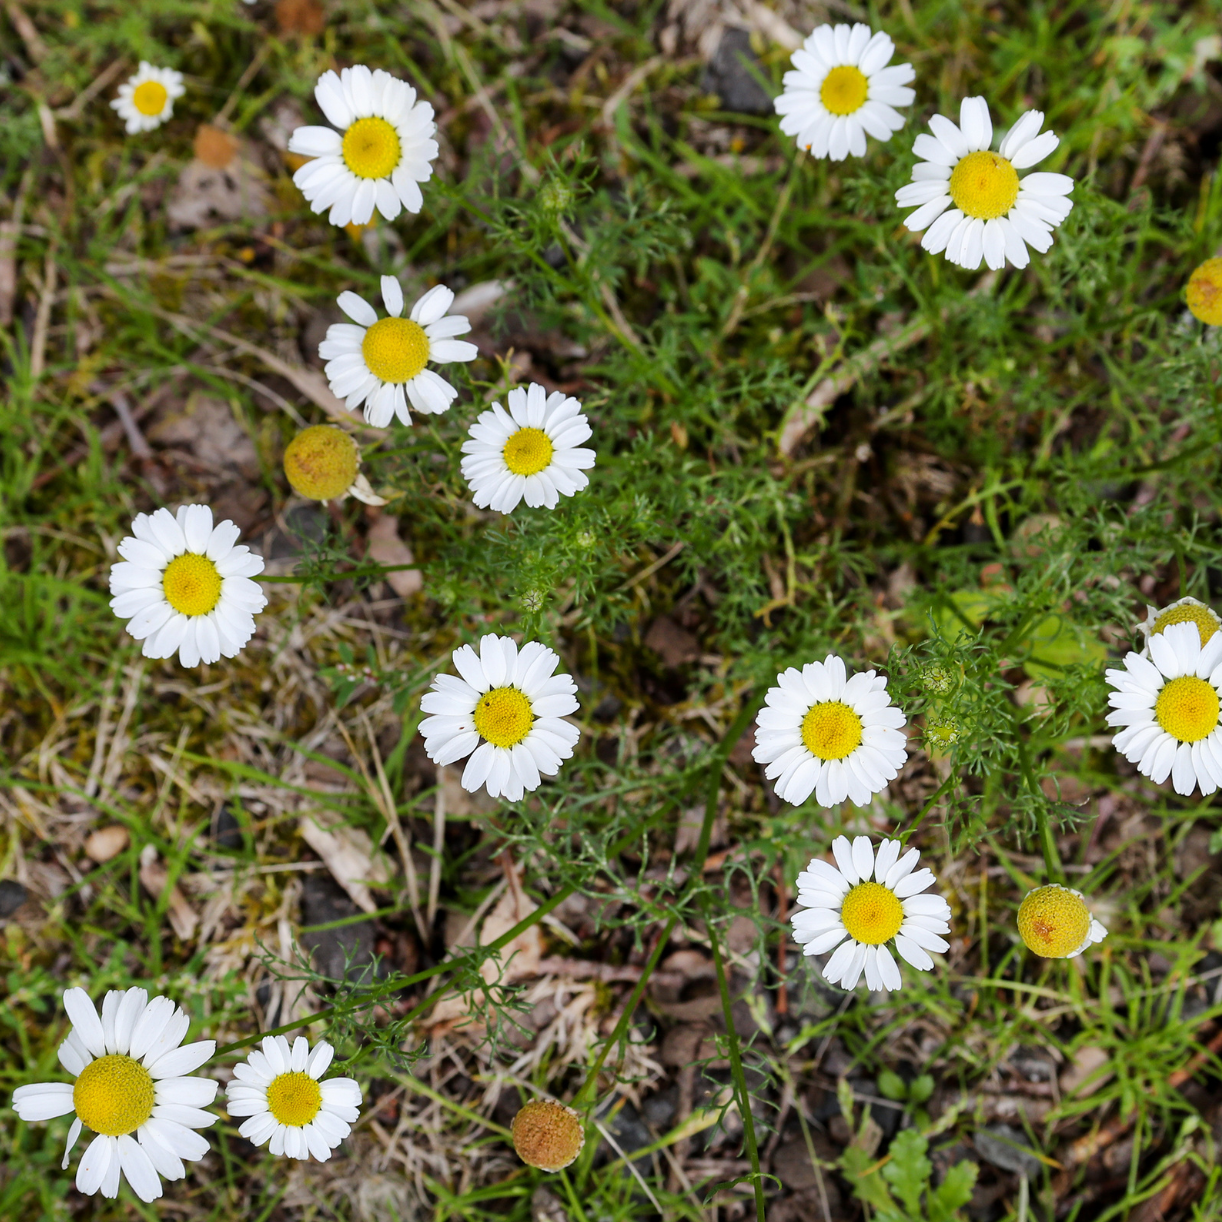 Daisies at Alne Wood Park Natural Burial Ground